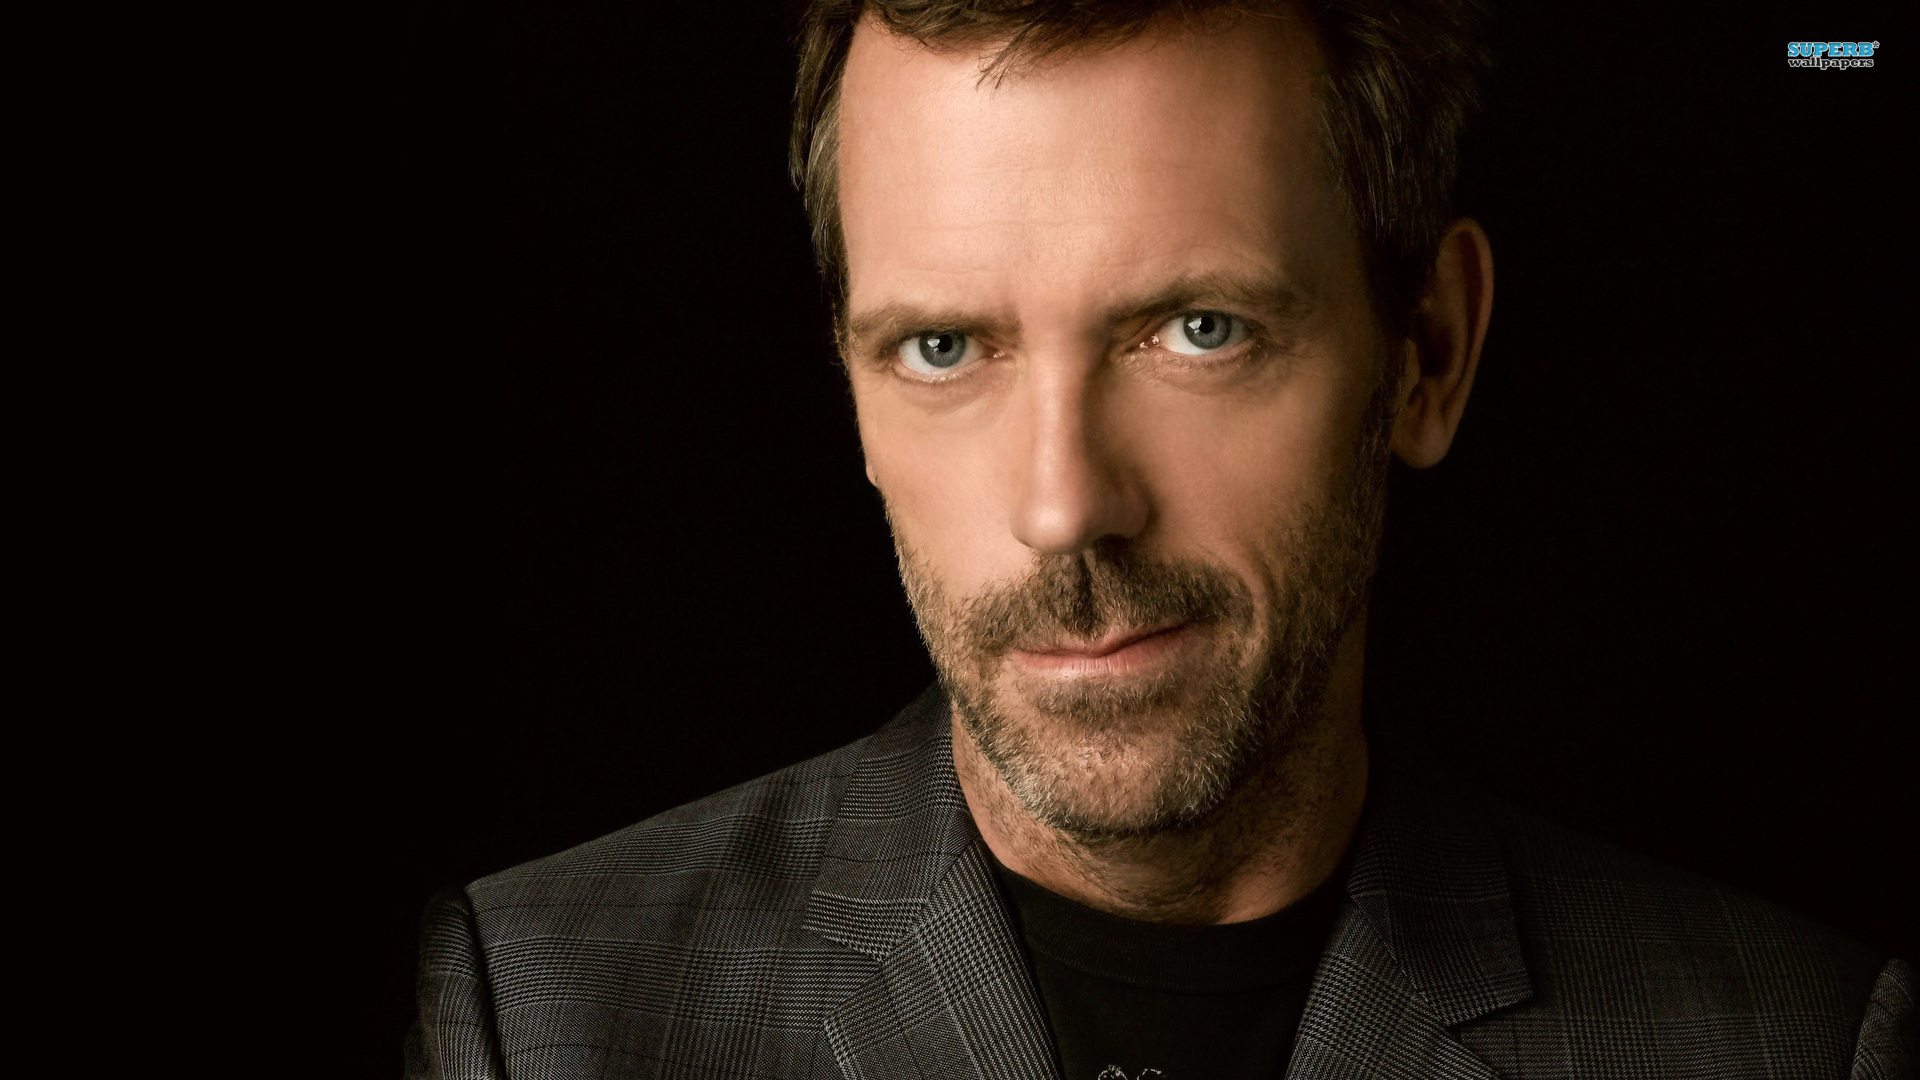 Piano Hugh Laurie